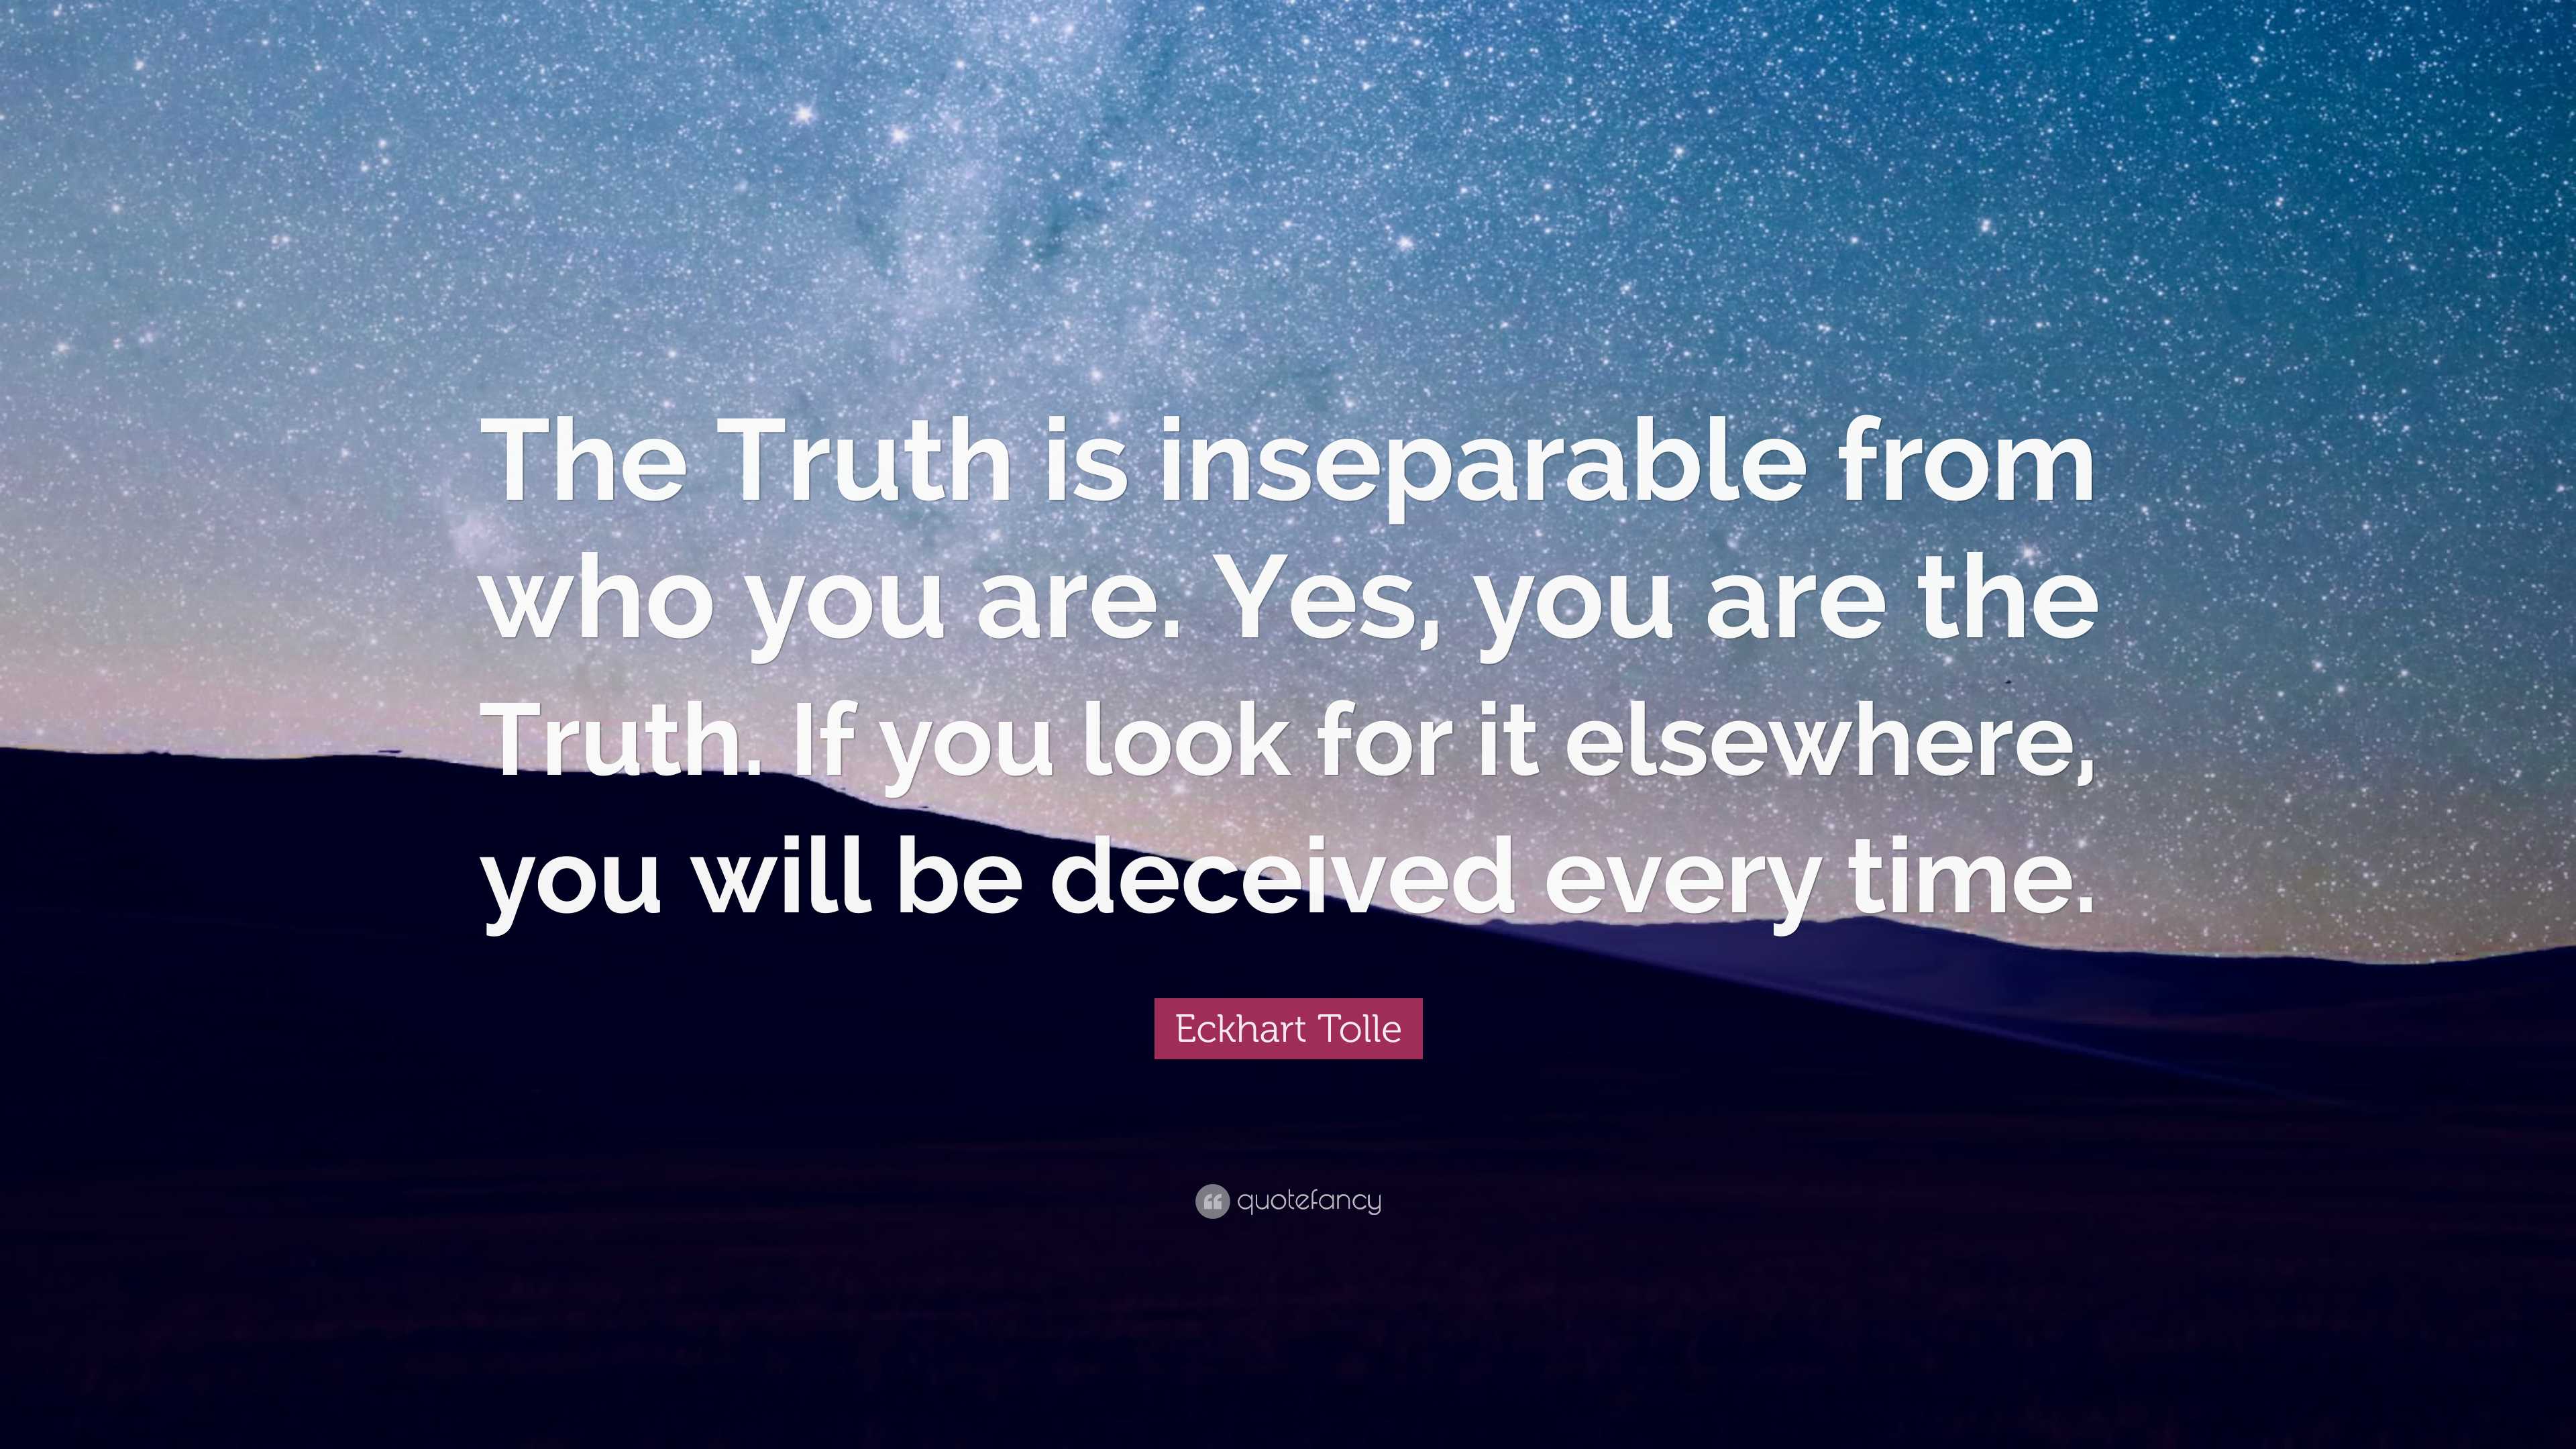 Eckhart Tolle Quote: “The Truth is inseparable from who you are. Yes ...